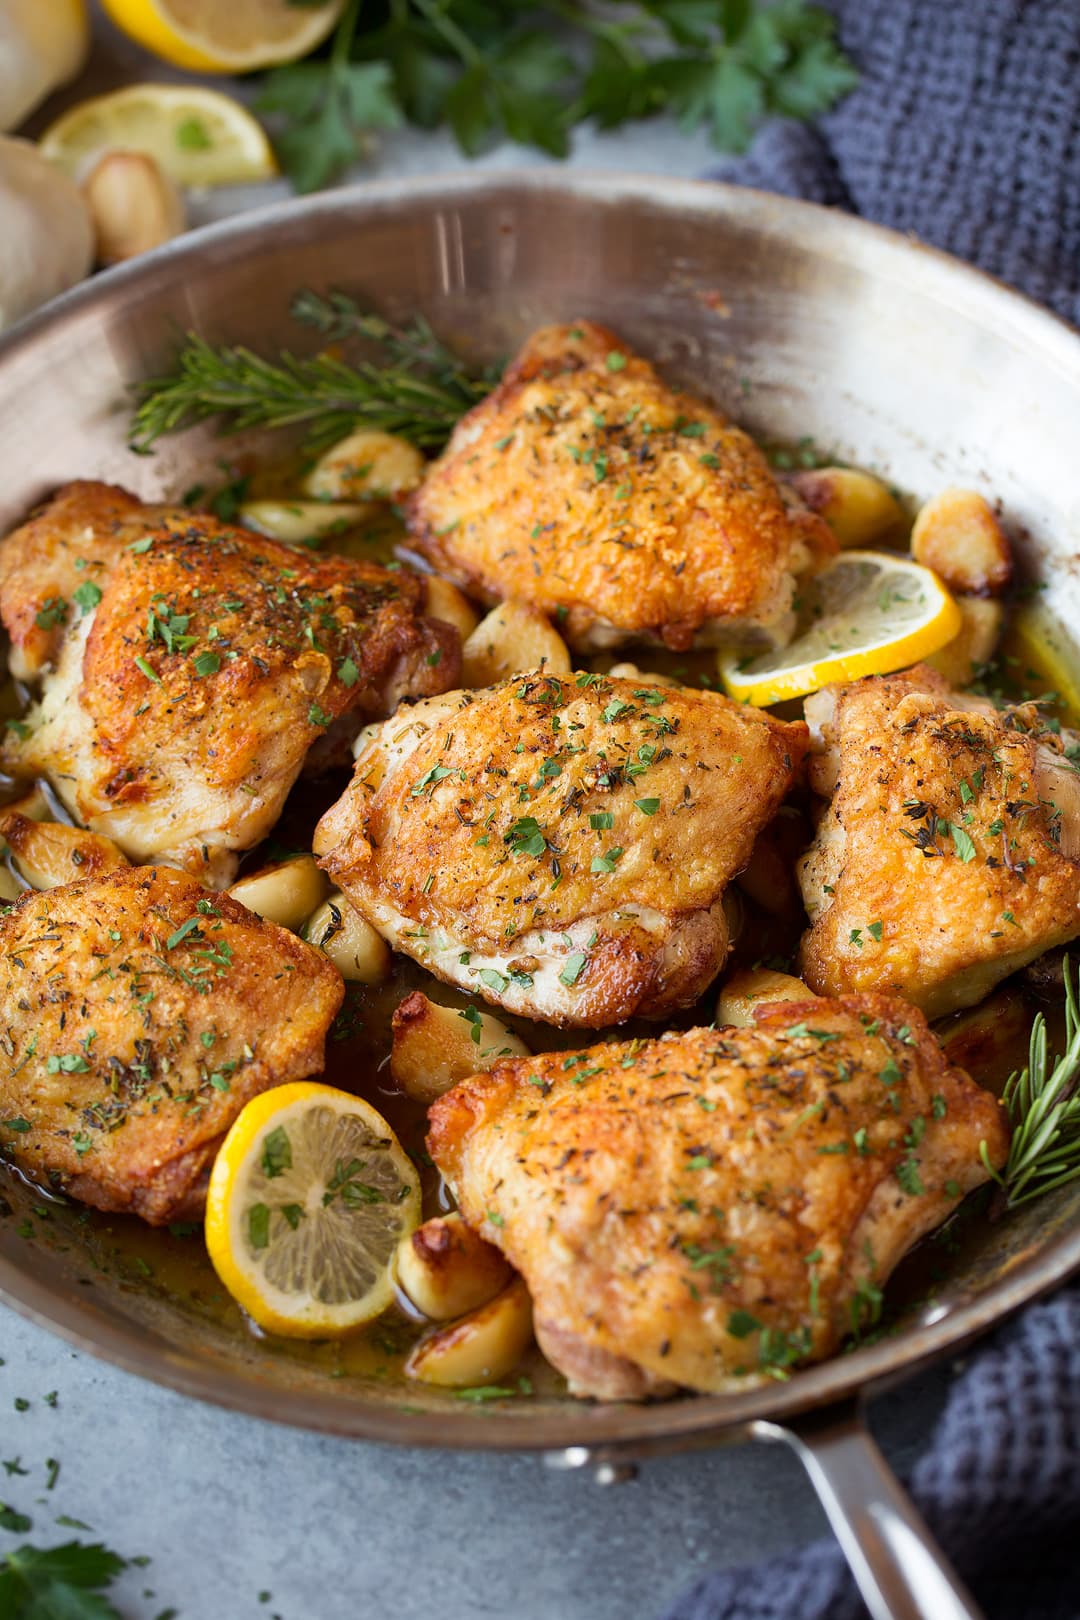 Six pieces of golden brown crispy chicken thighs shown here in a skillet after roasting with garlic and herbs.